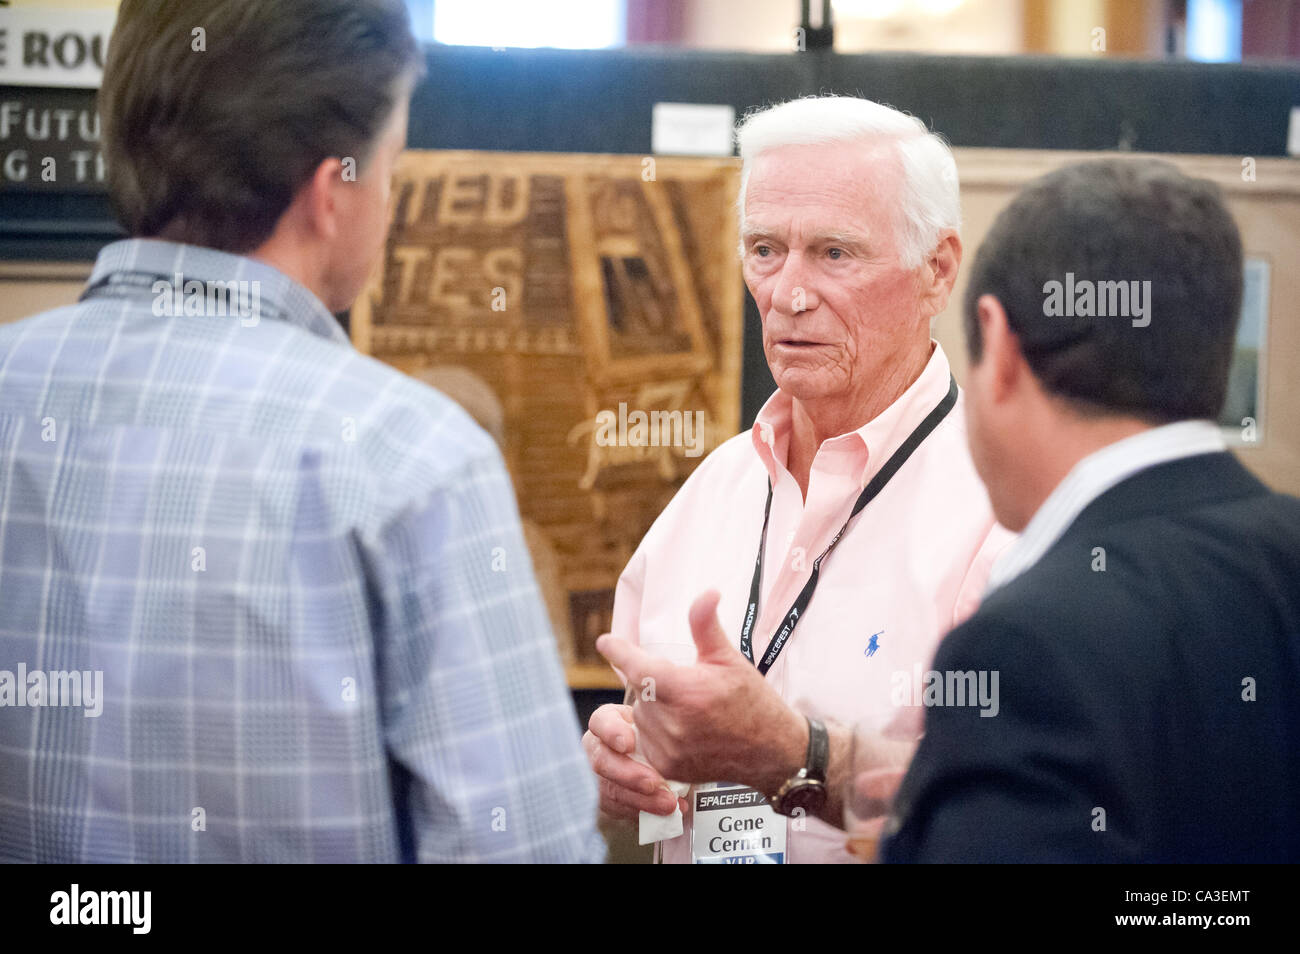 May 31, 2012 - Astronaut GENE CERNAN, who flew on both Gemini and Apollo missions and is the last man to have walked on the moon, is in Tucson, Ariz. at the Spacefest IV convention on the day the private Space-X space craft Dragon successfully splashed down marking a successful end to the first comm Stock Photo